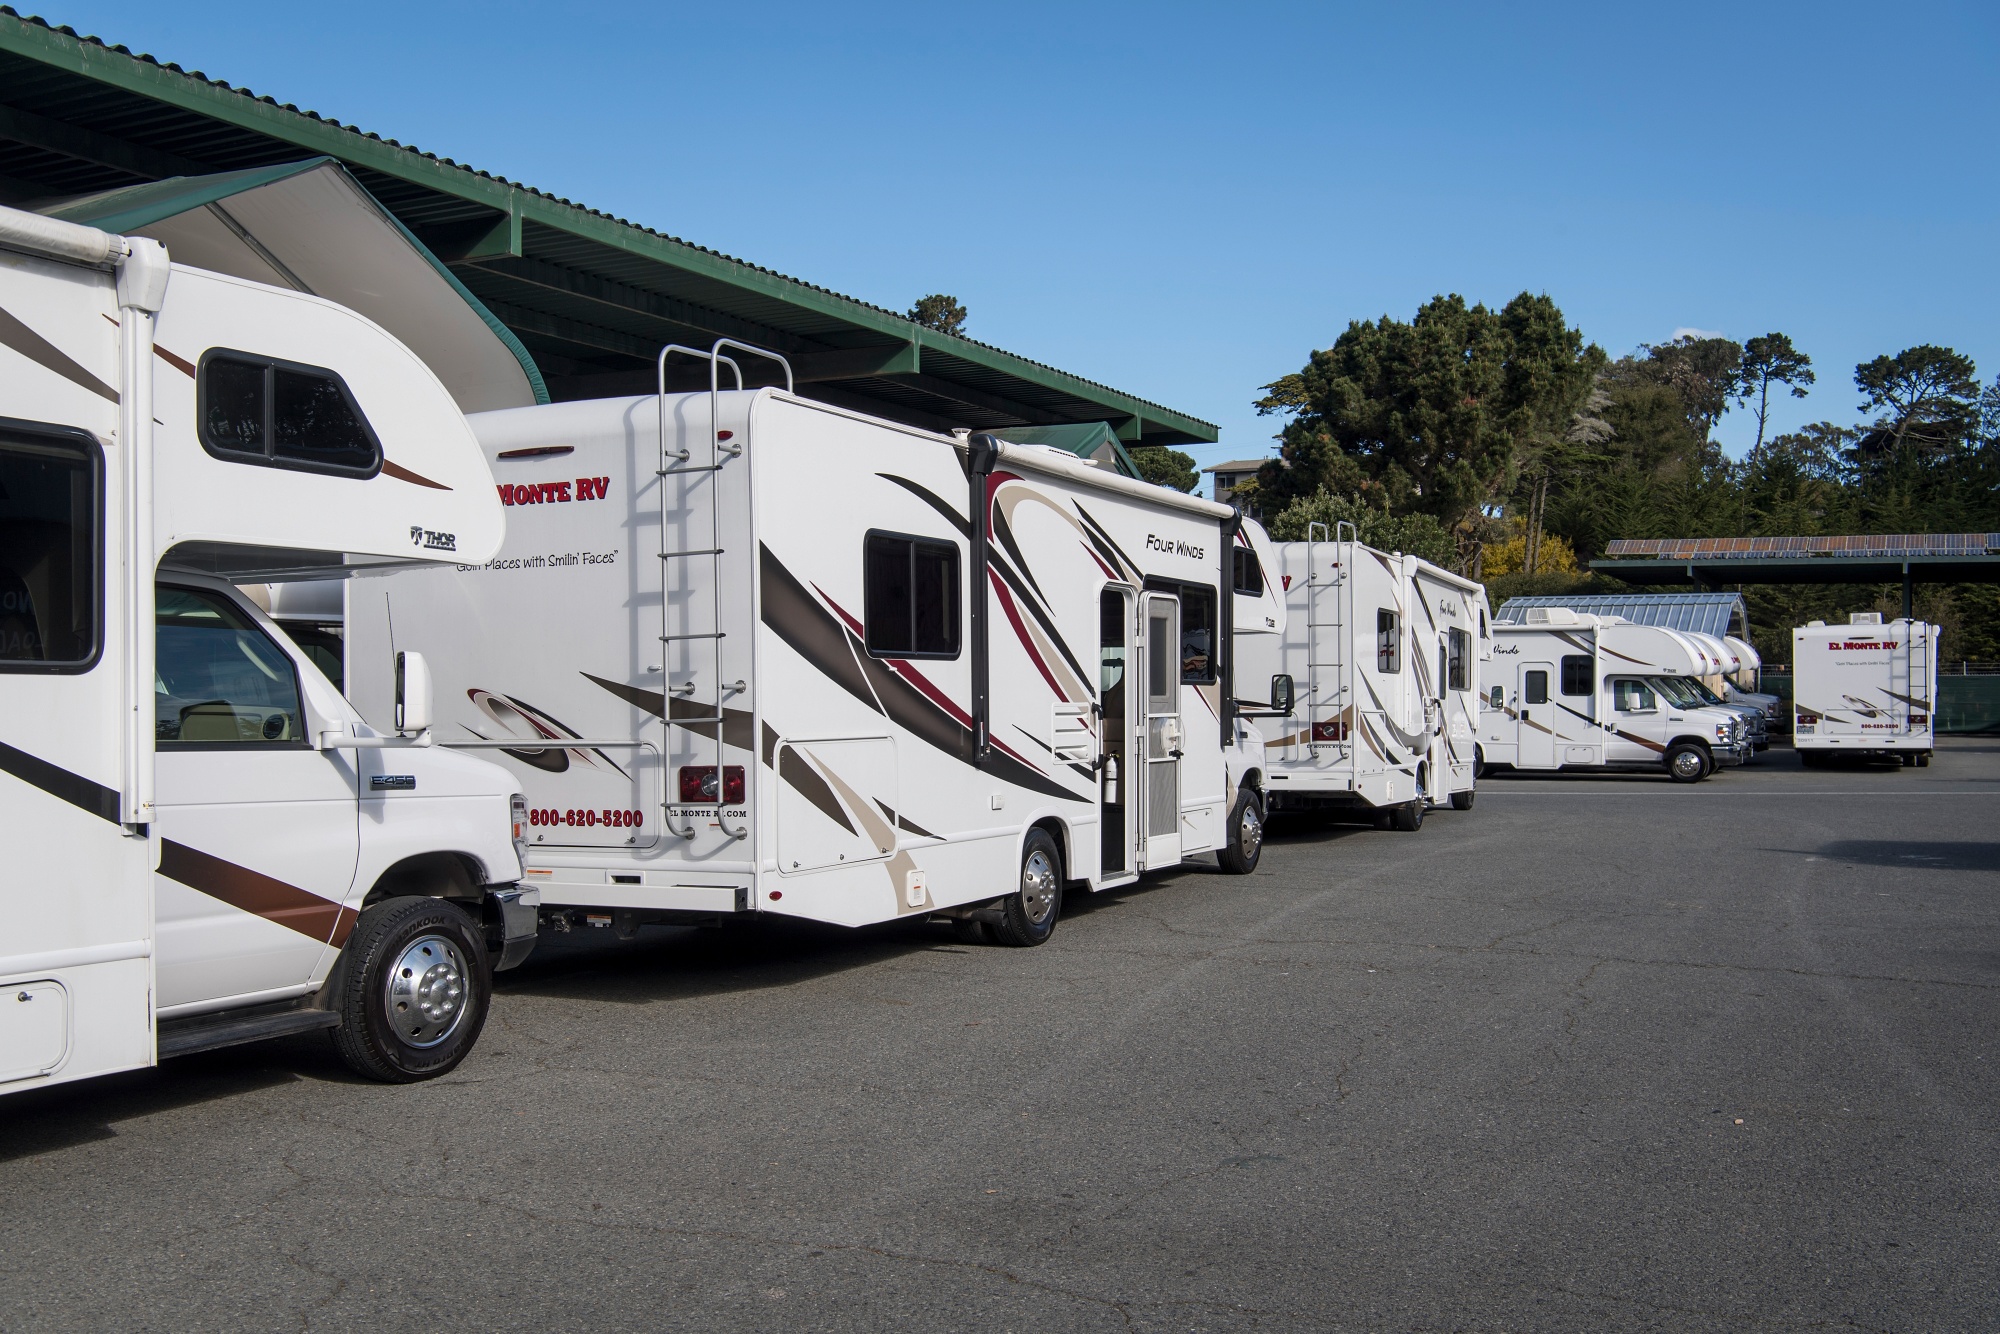 Motorhomes stand at a temporary quarantine location in San Francisco on March 11.